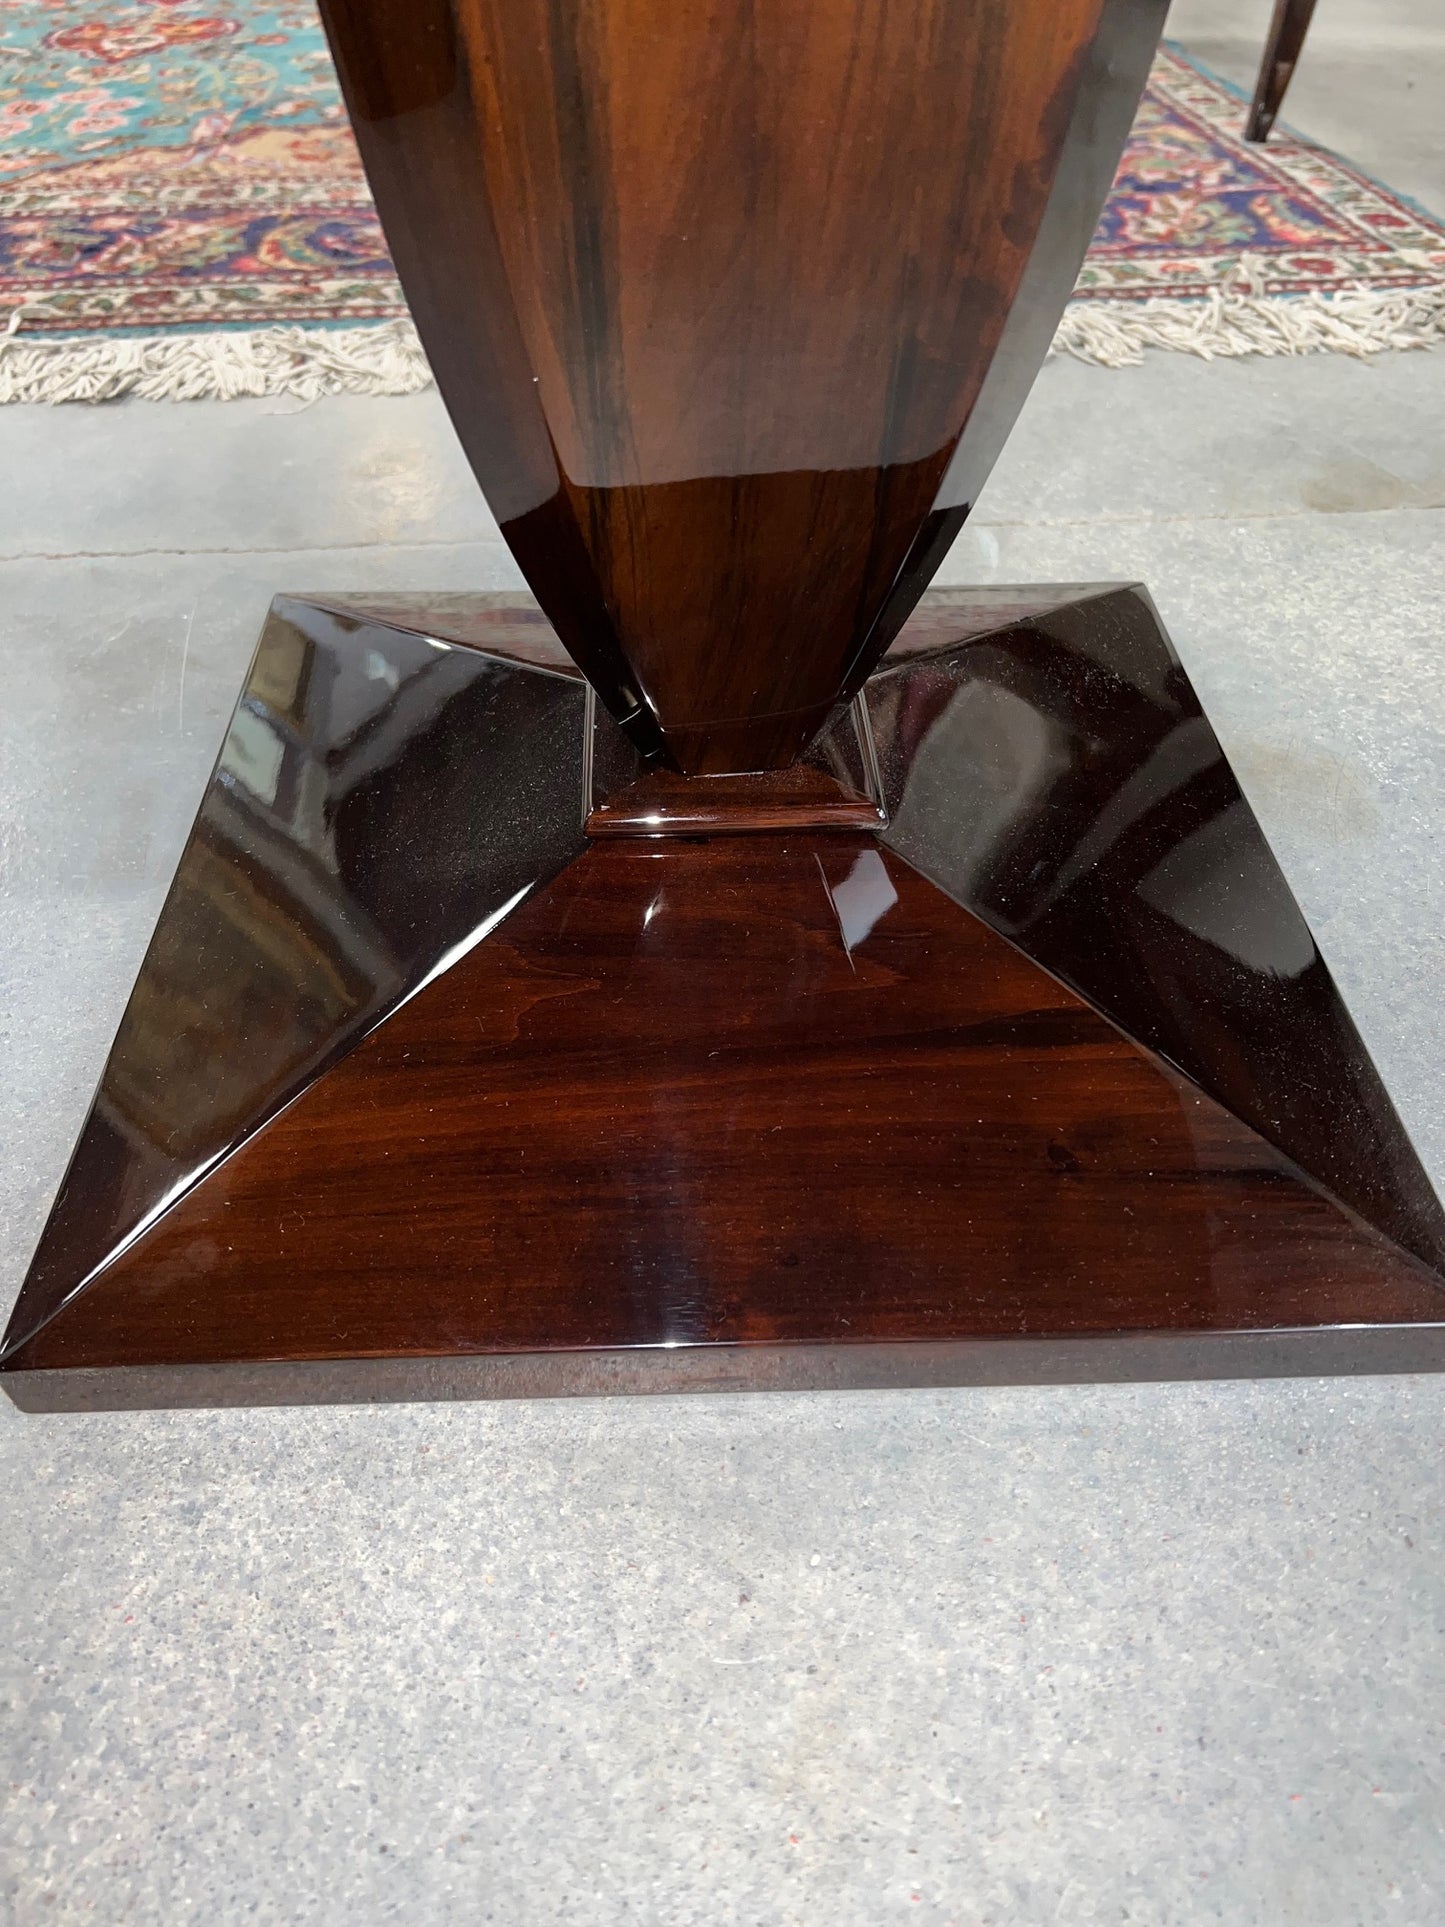 Art Deco Side table from France, c. 1930s